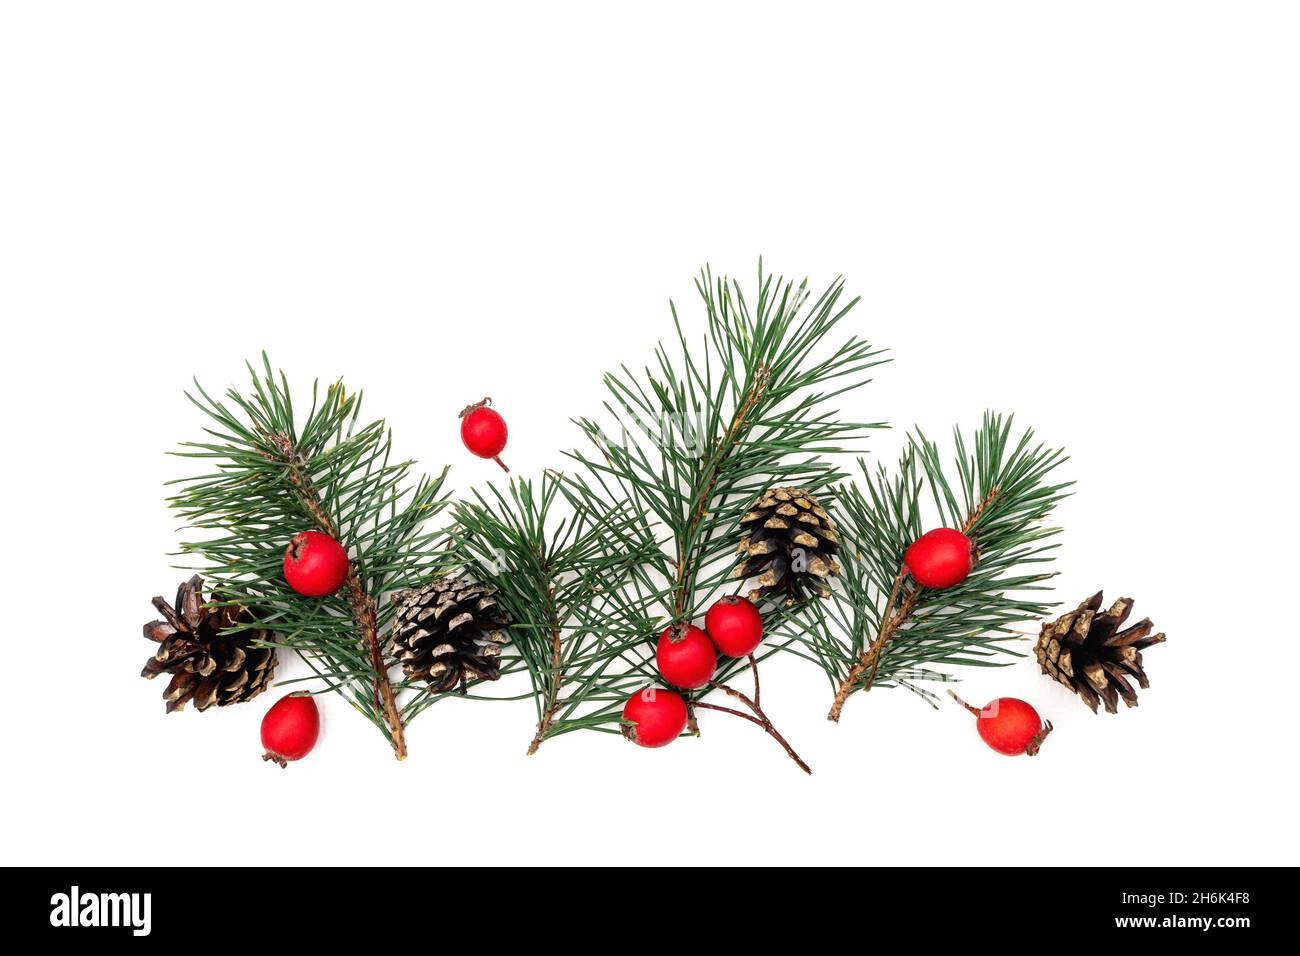 Christmas Sprigs of Pine Needle Bulbs Red Berries Invitation